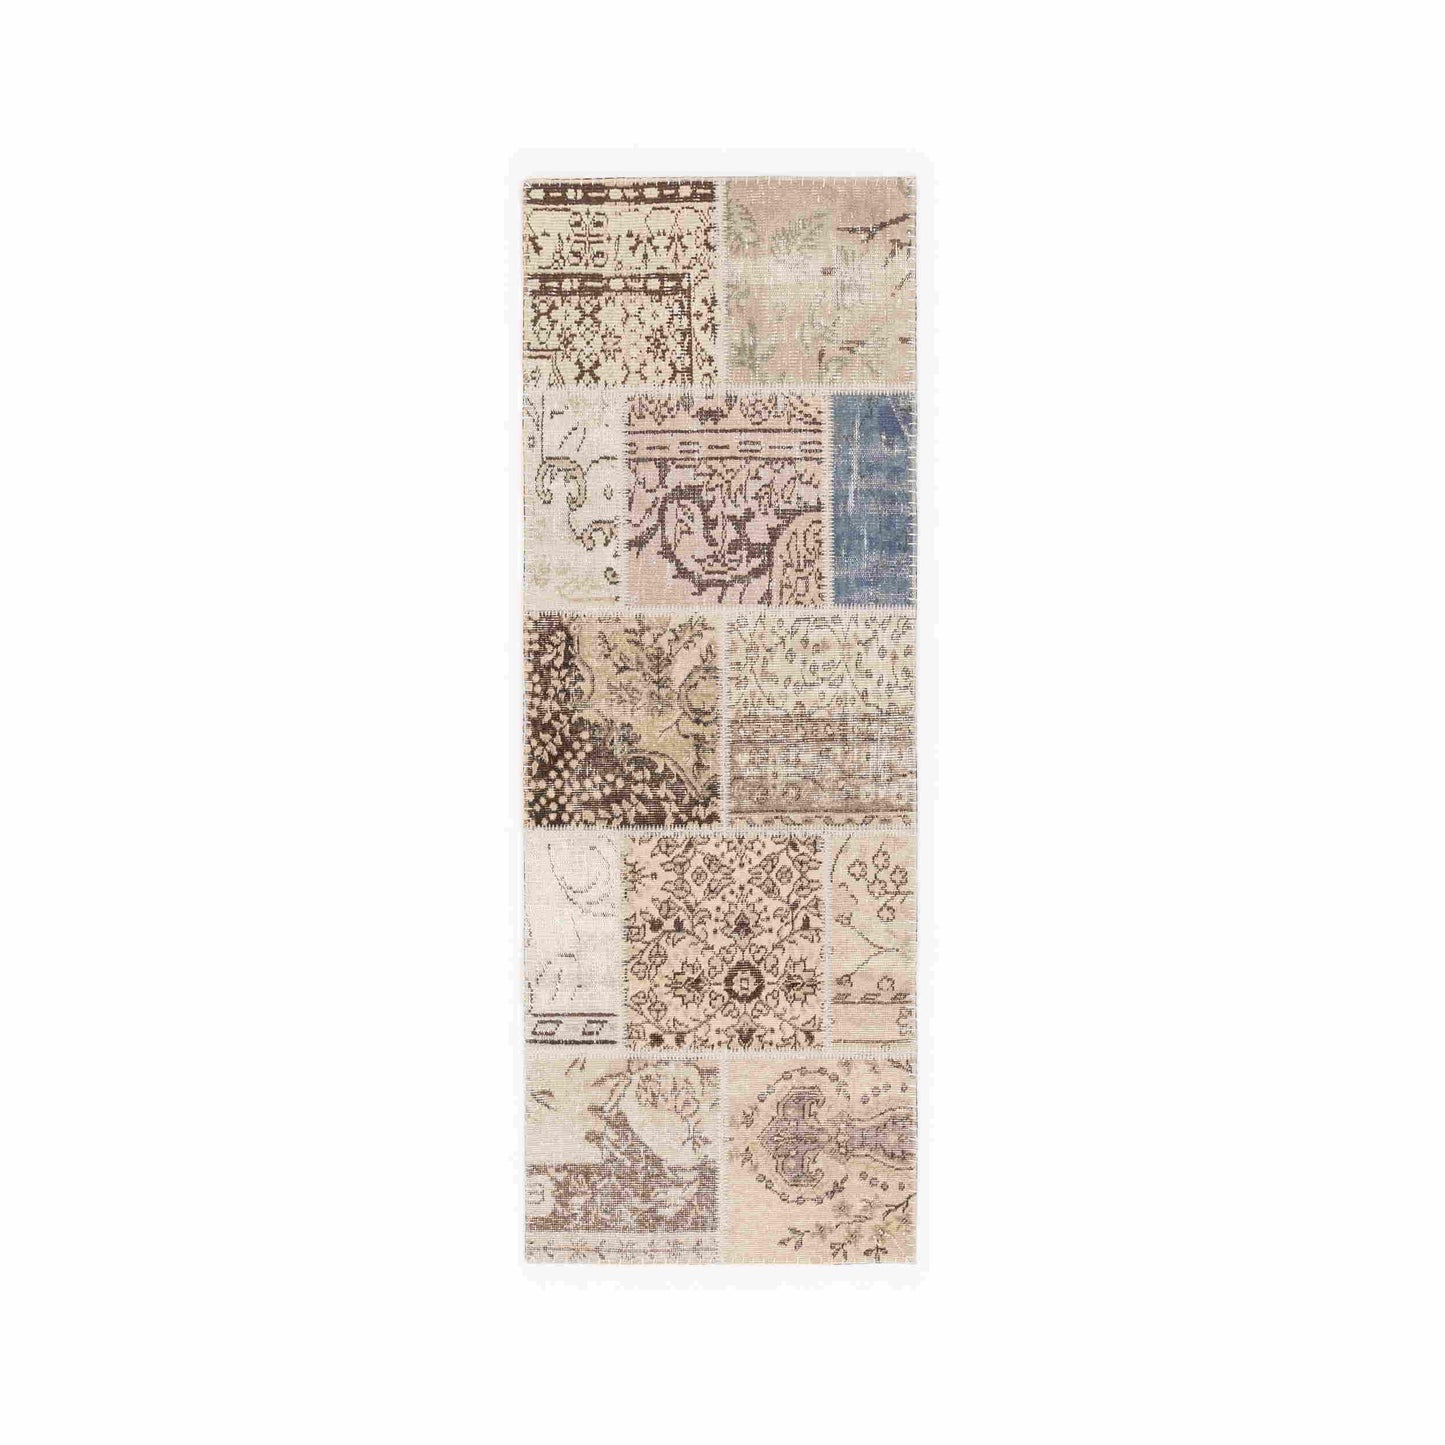 Oriental Rug Patchwork Hand Knotted Wool On Wool 76 x 212 Cm – 2' 6'' x 7' Sand C007 ER01